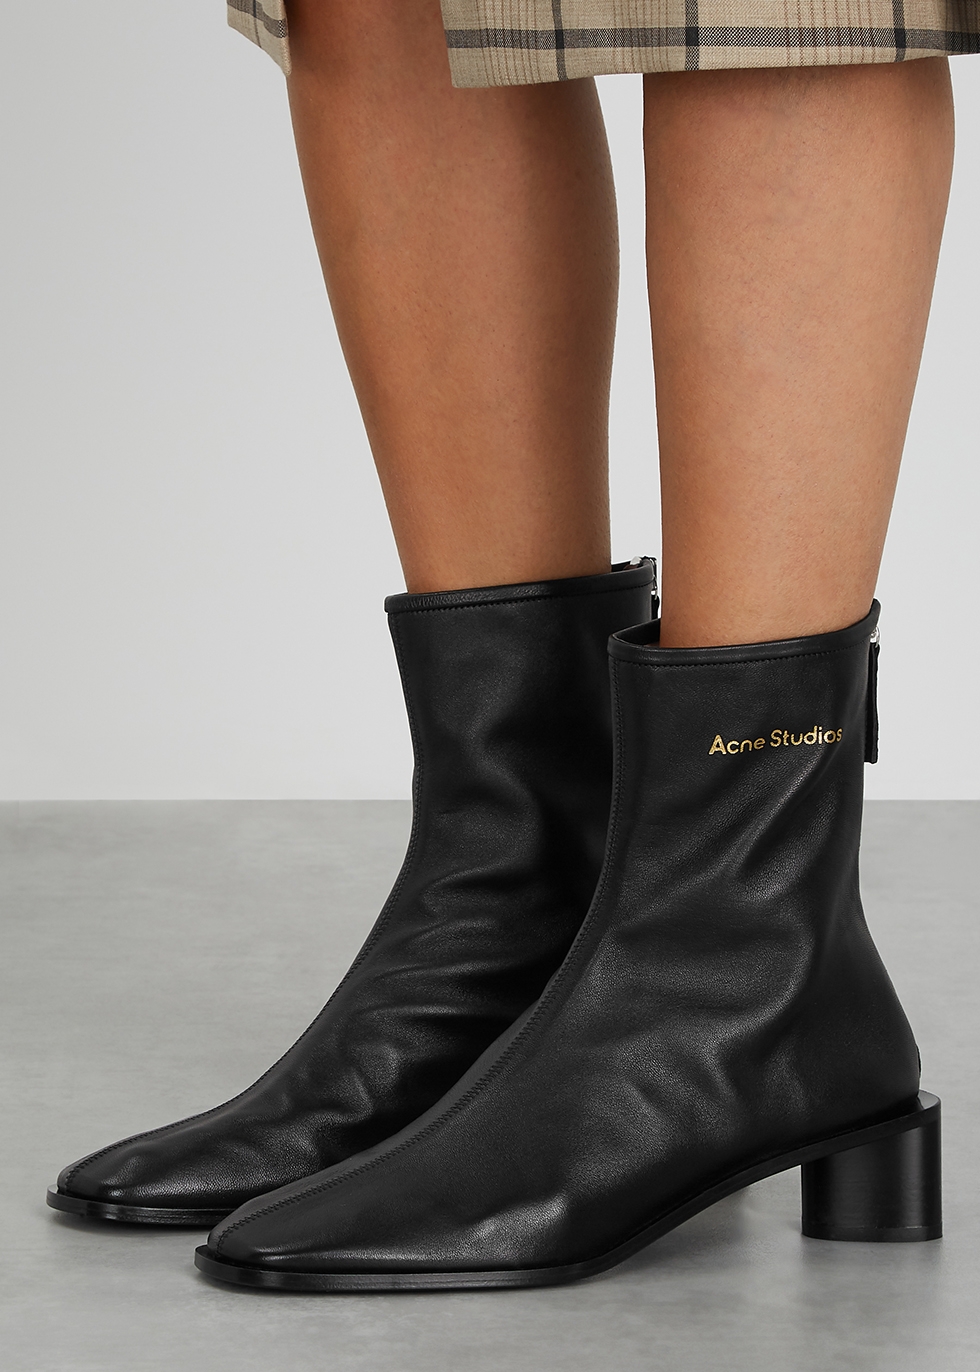 acne studios leather ankle boots